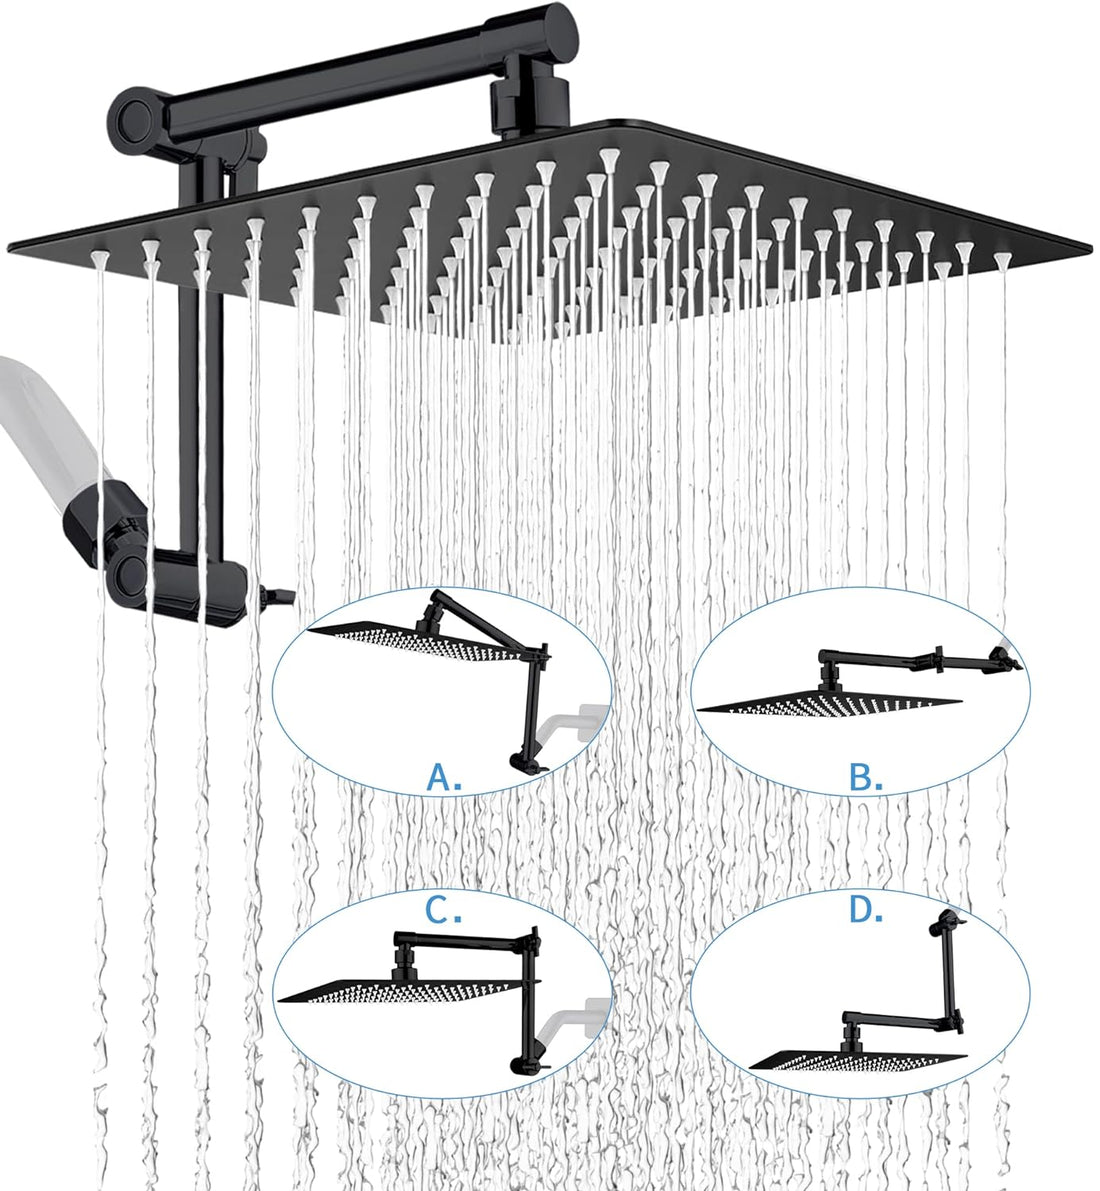 G-Promise Rain Shower Head with 13" Adjustable Extension Arm | High Pressure Solid Metal Rainfall Showerhead | 10" Luxury Morden Look Square Large Waterfall Showerhead (Matte Black)